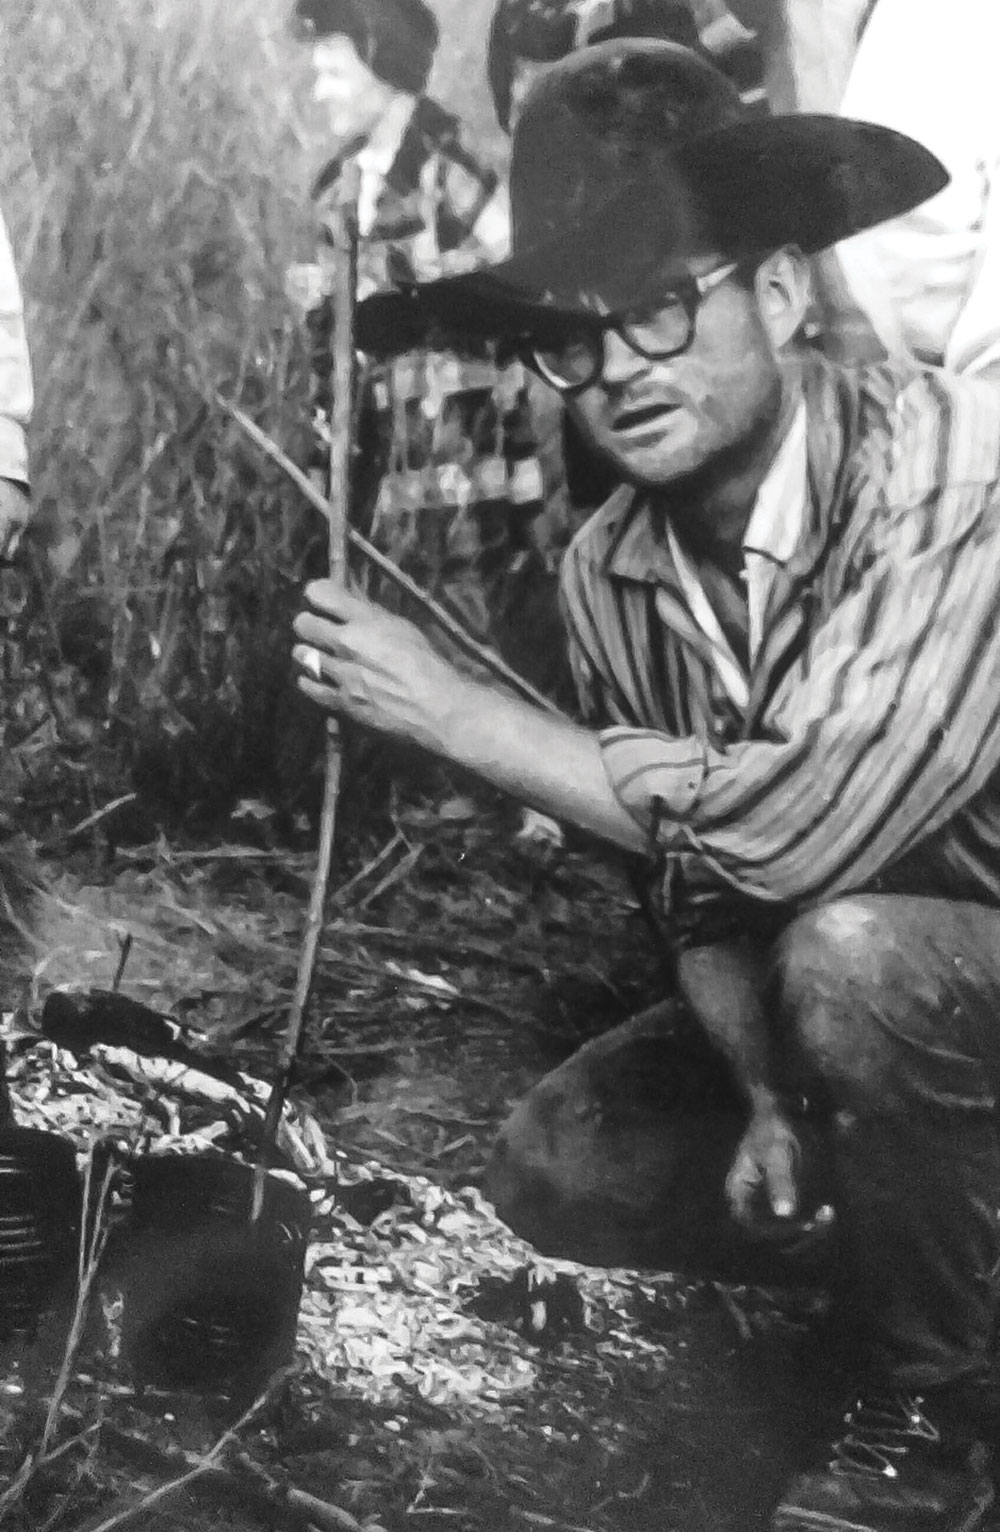 Olsen cooks in his billy can during a survival trip, circa late 1960s. (Photo: Olsen archives)